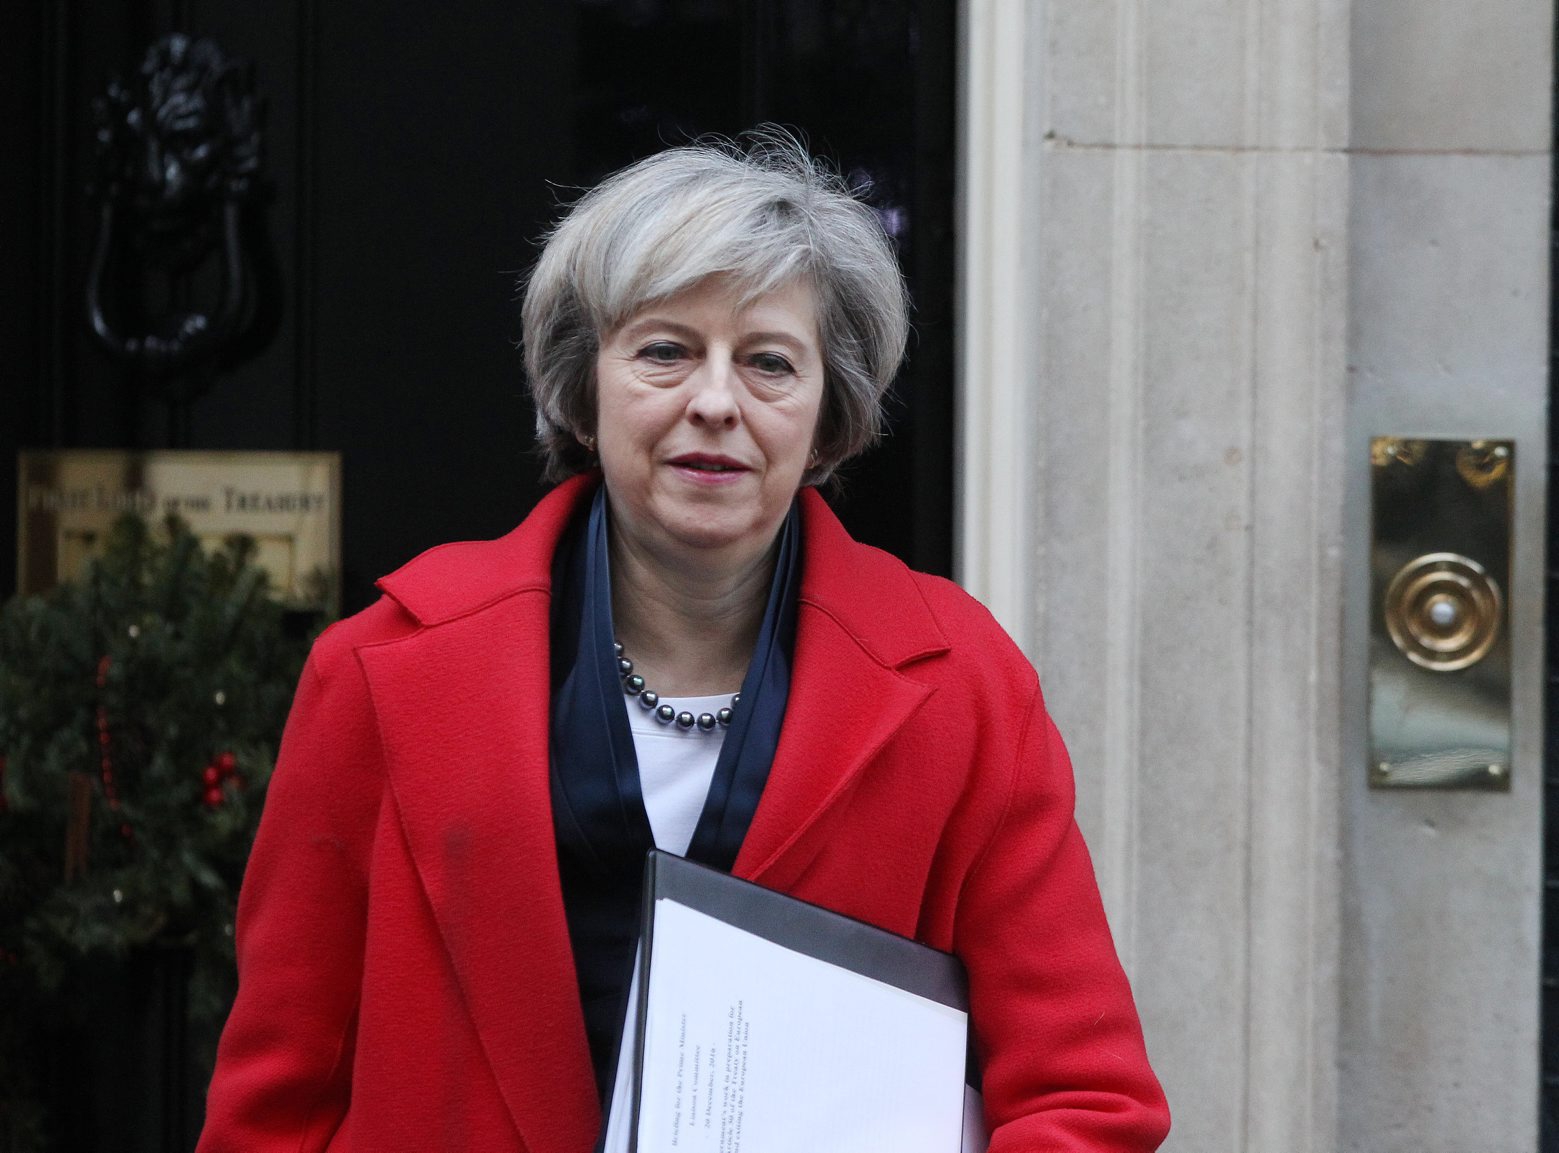 British PM Theresa May outside No.10 Downing Street, London on her way to a Parliamentary Committee Meeting over Brexit and.the exit by Great Britain from the European Union. (KEYSTONE/CAMERA PRESS/Steve Bell) 303046-03246431